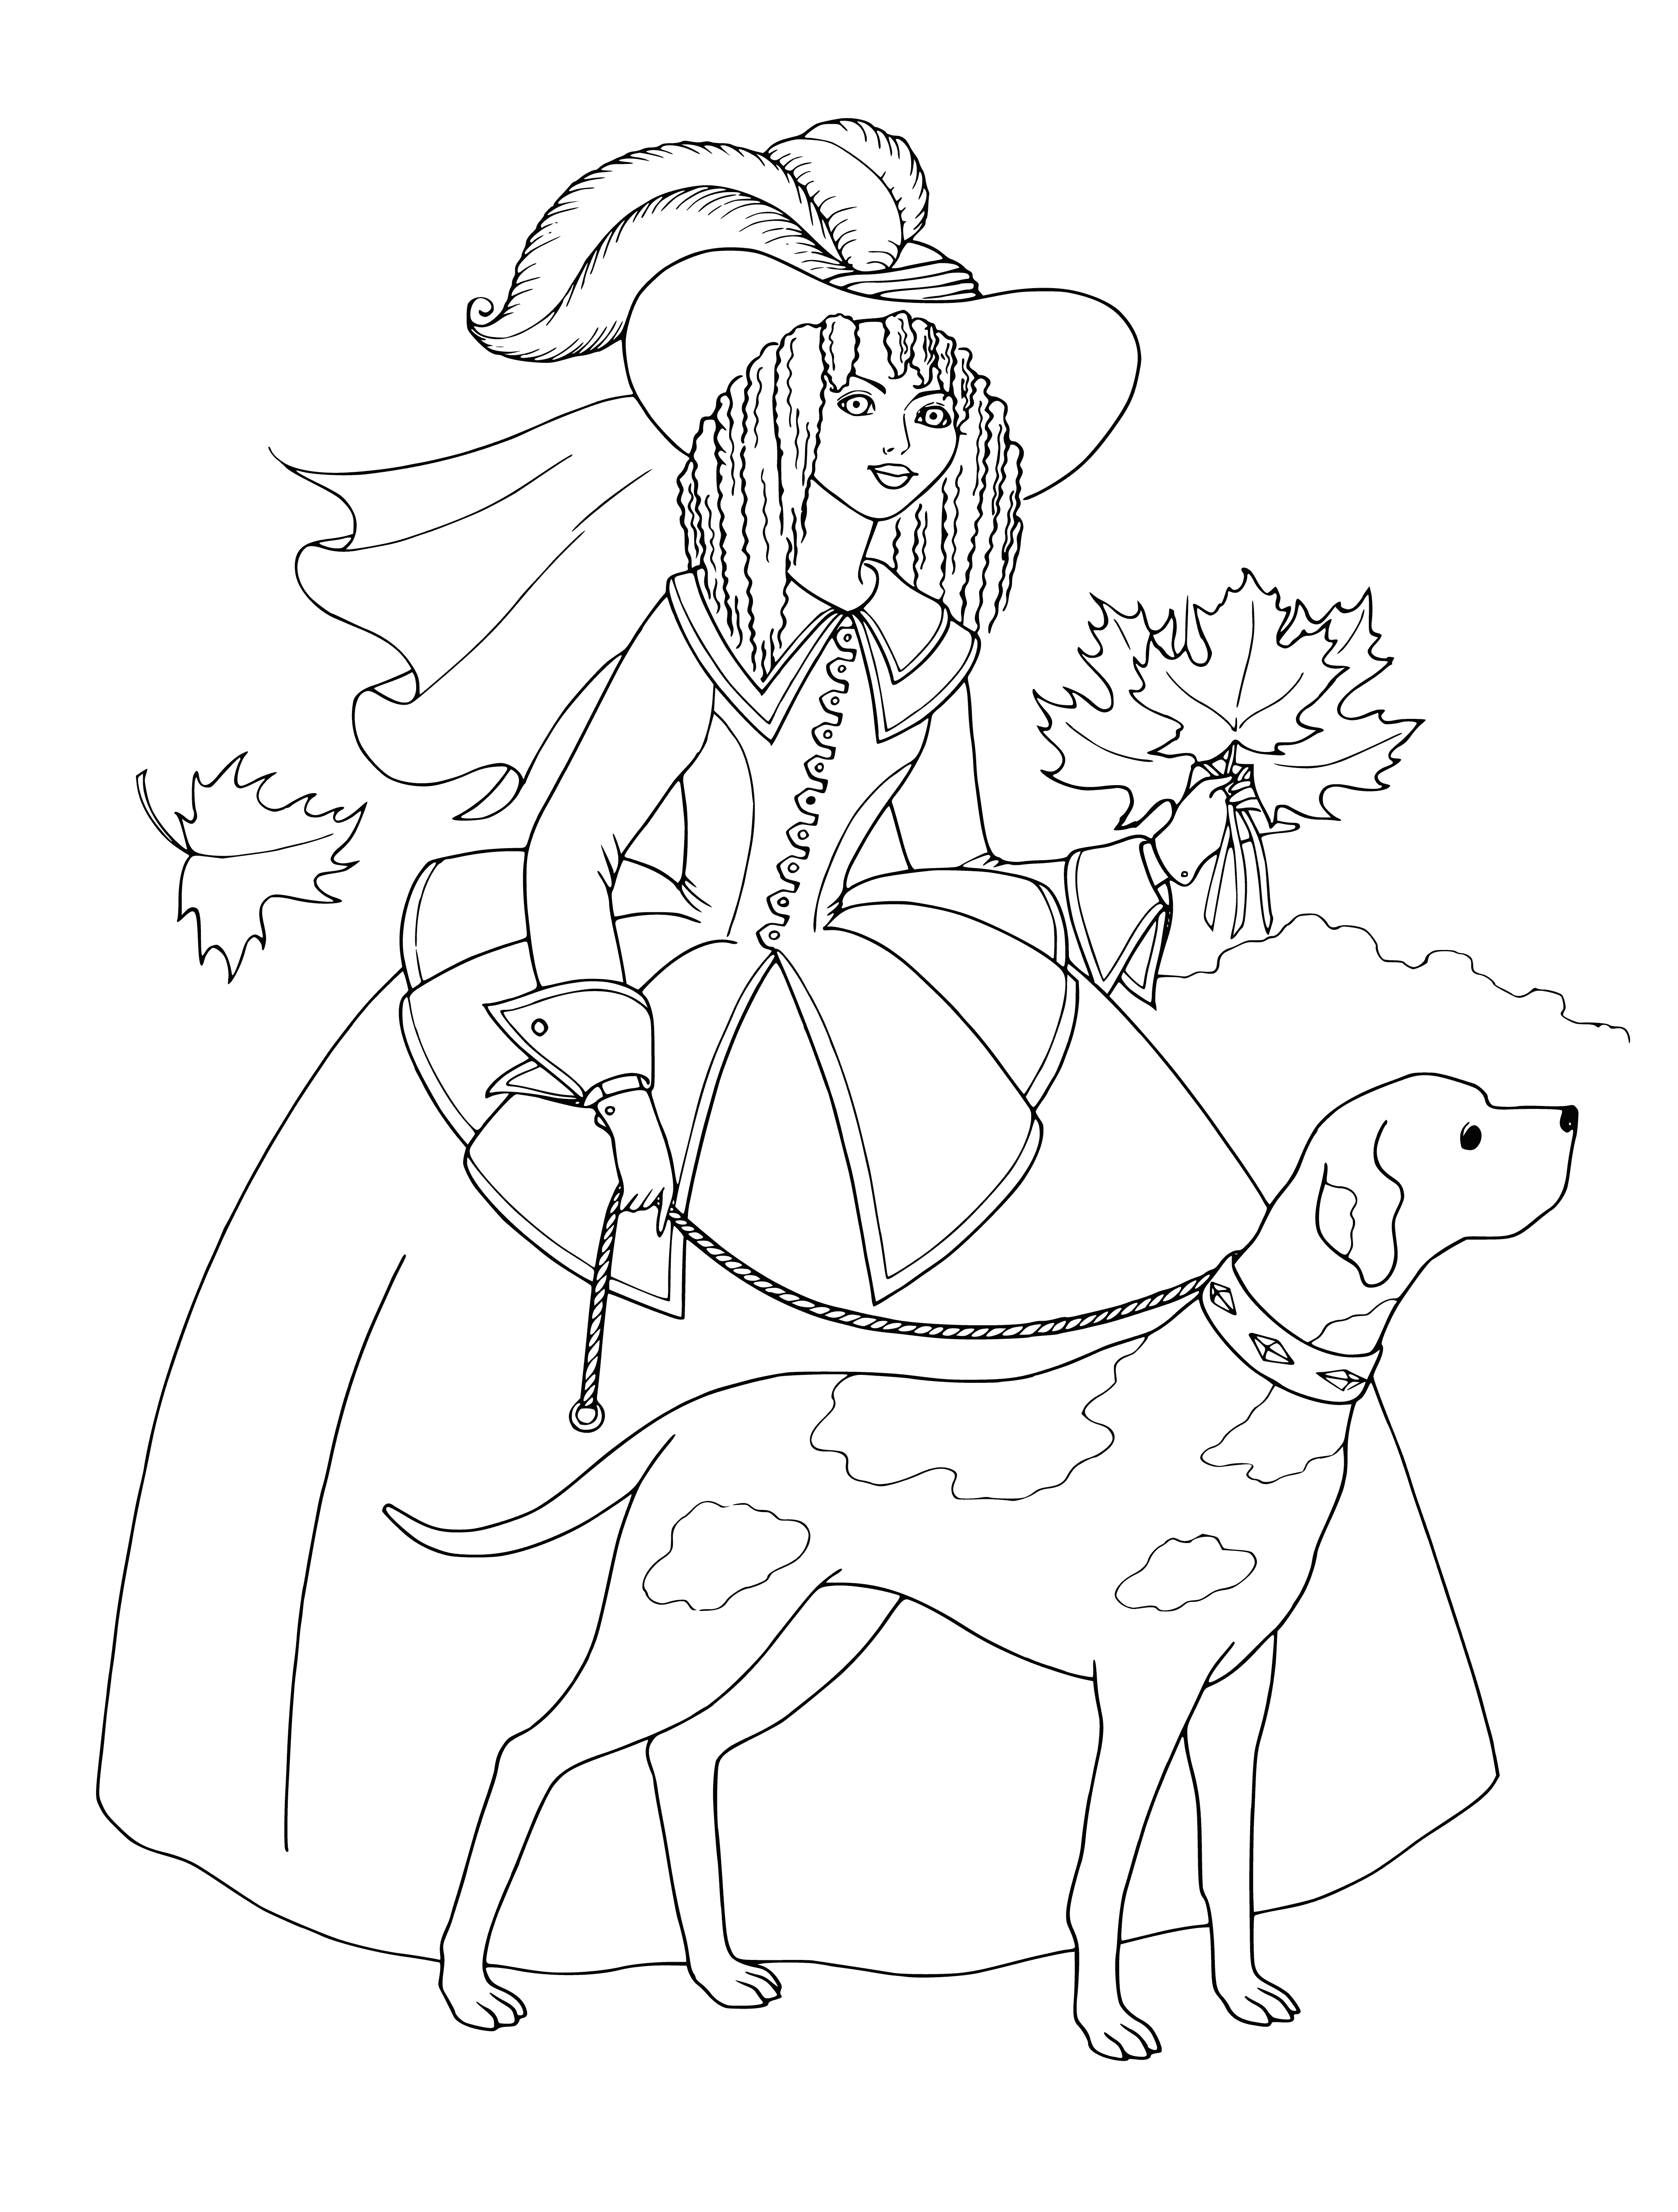 coloring page: Girl in blue dress w/ white cape & tiara walking in field w/ a white & black spotted dog on a leash.